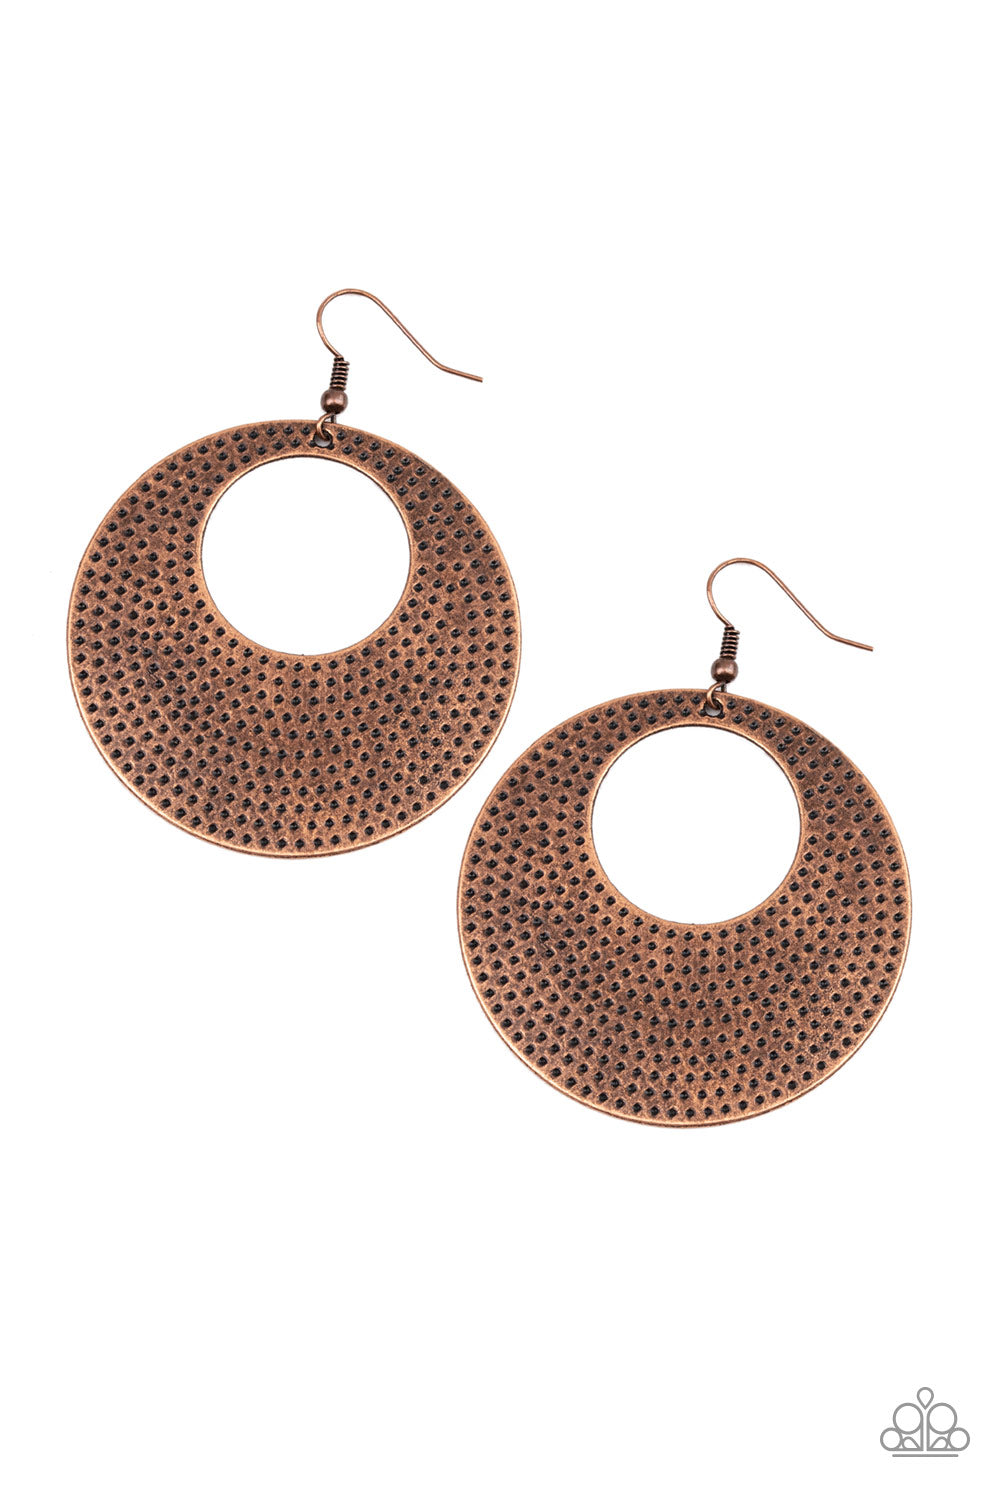 Dotted Delicacy - Copper - VJ Bedazzled Jewelry